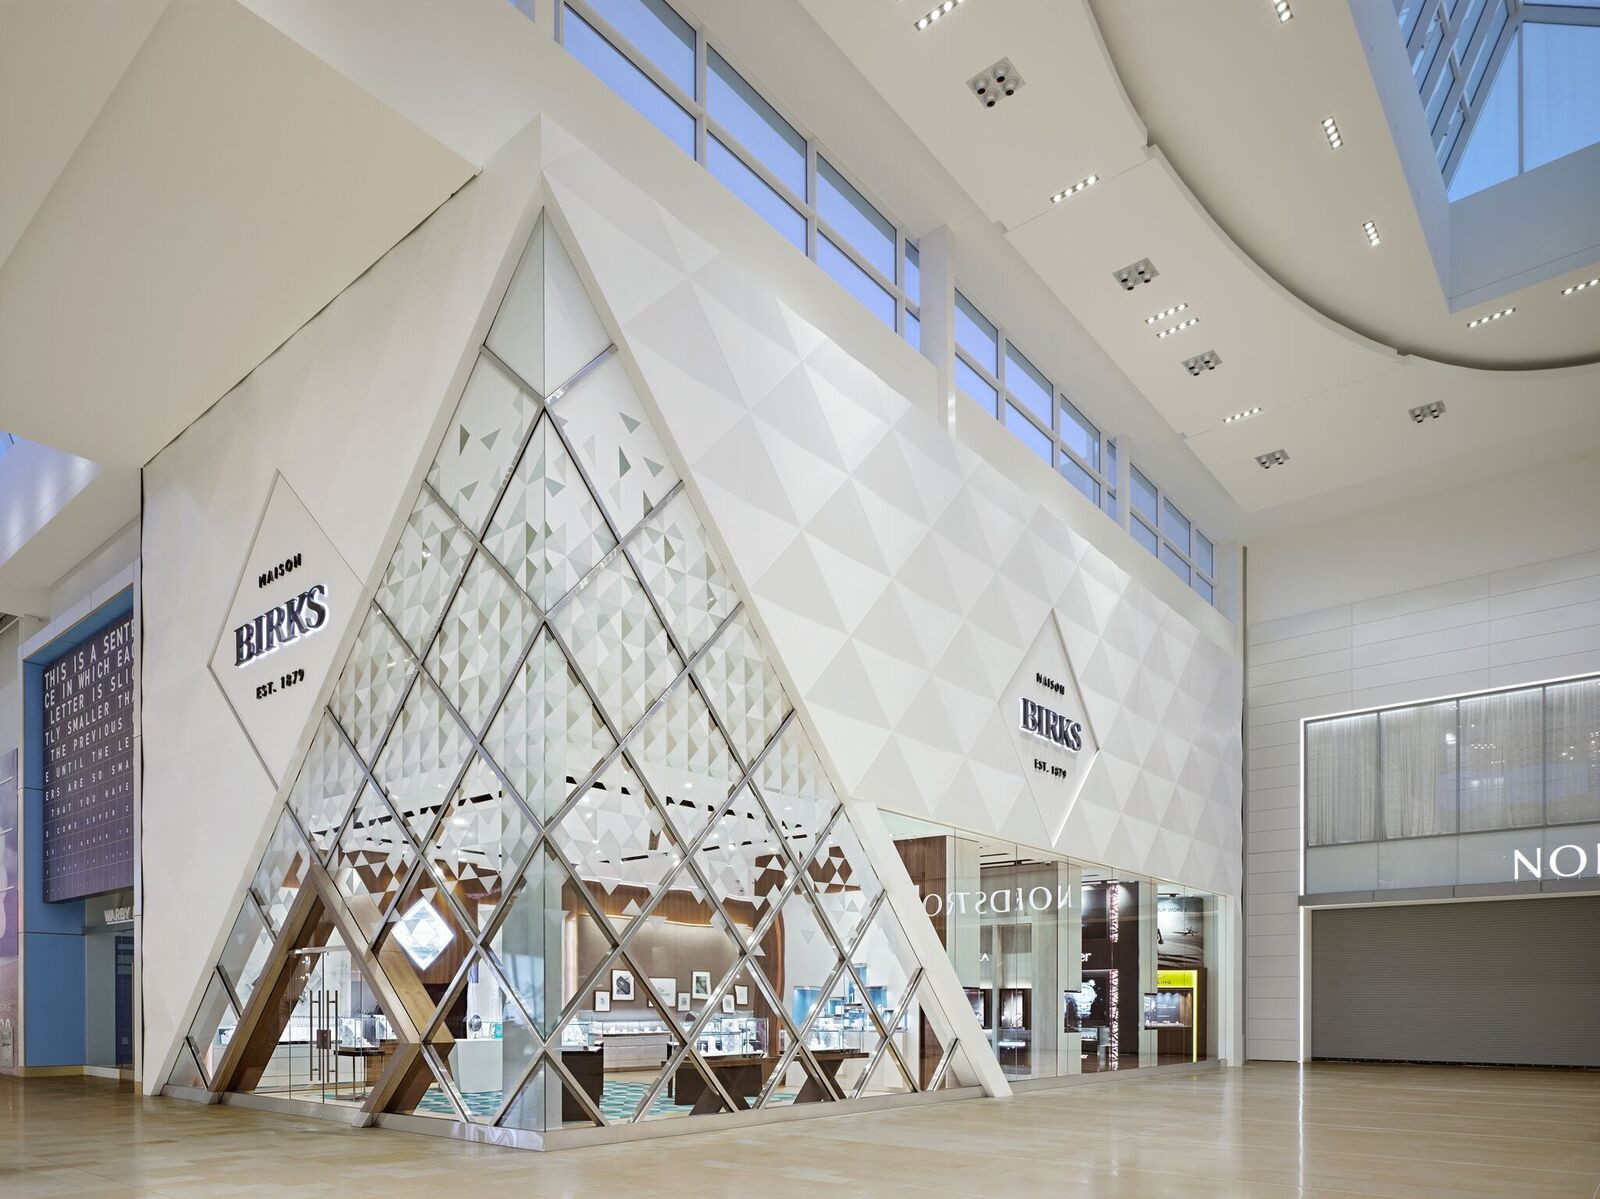 28 Awesome Yorkdale Hardwood Flooring Centre Ontario 2024 free download yorkdale hardwood flooring centre ontario of maison birks yorkdale design source guide in launched a new store design targeting younger customers including a bridal section geared towards mi